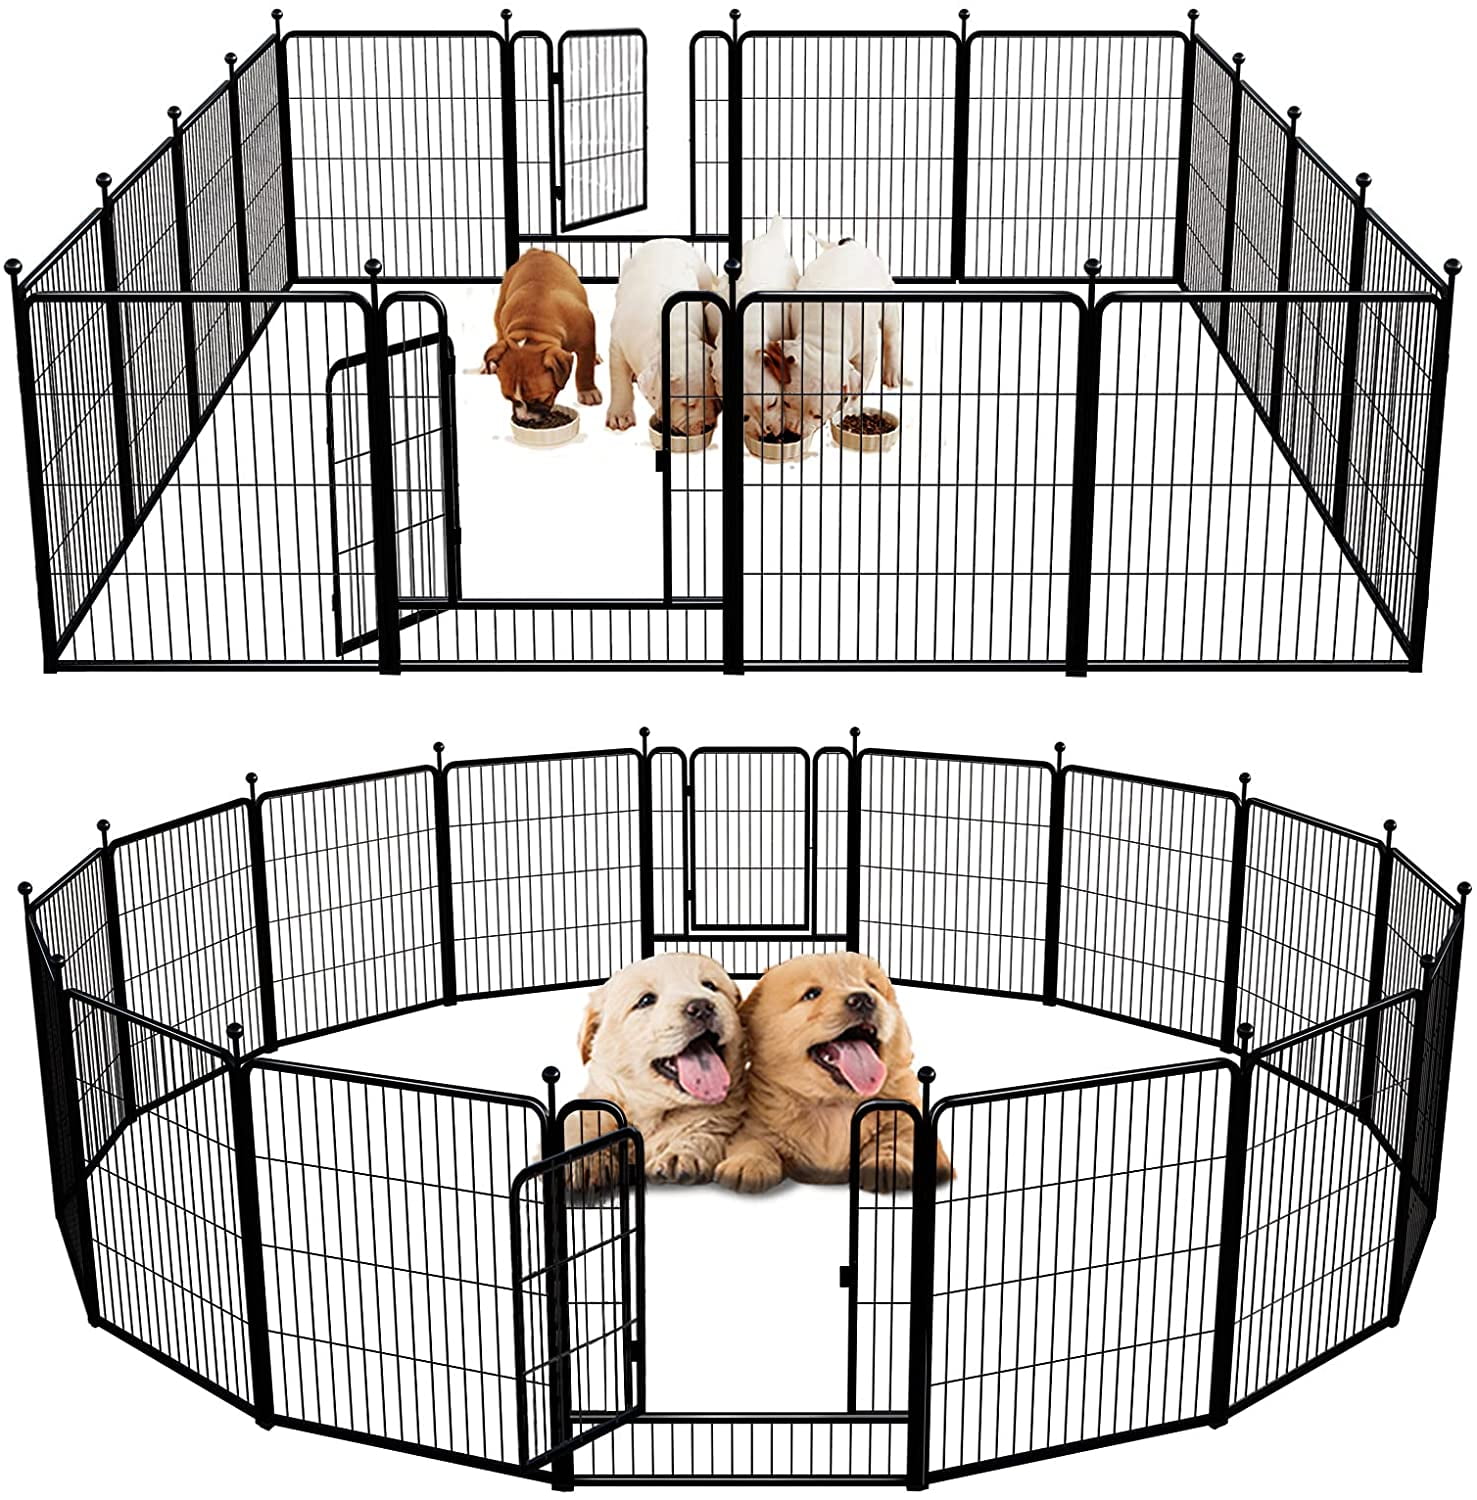 16 Panel Heavy Duty Cage Pet Dog Cat Barrier Fence Exercise Metal Playpen Kennel by ShinShop 